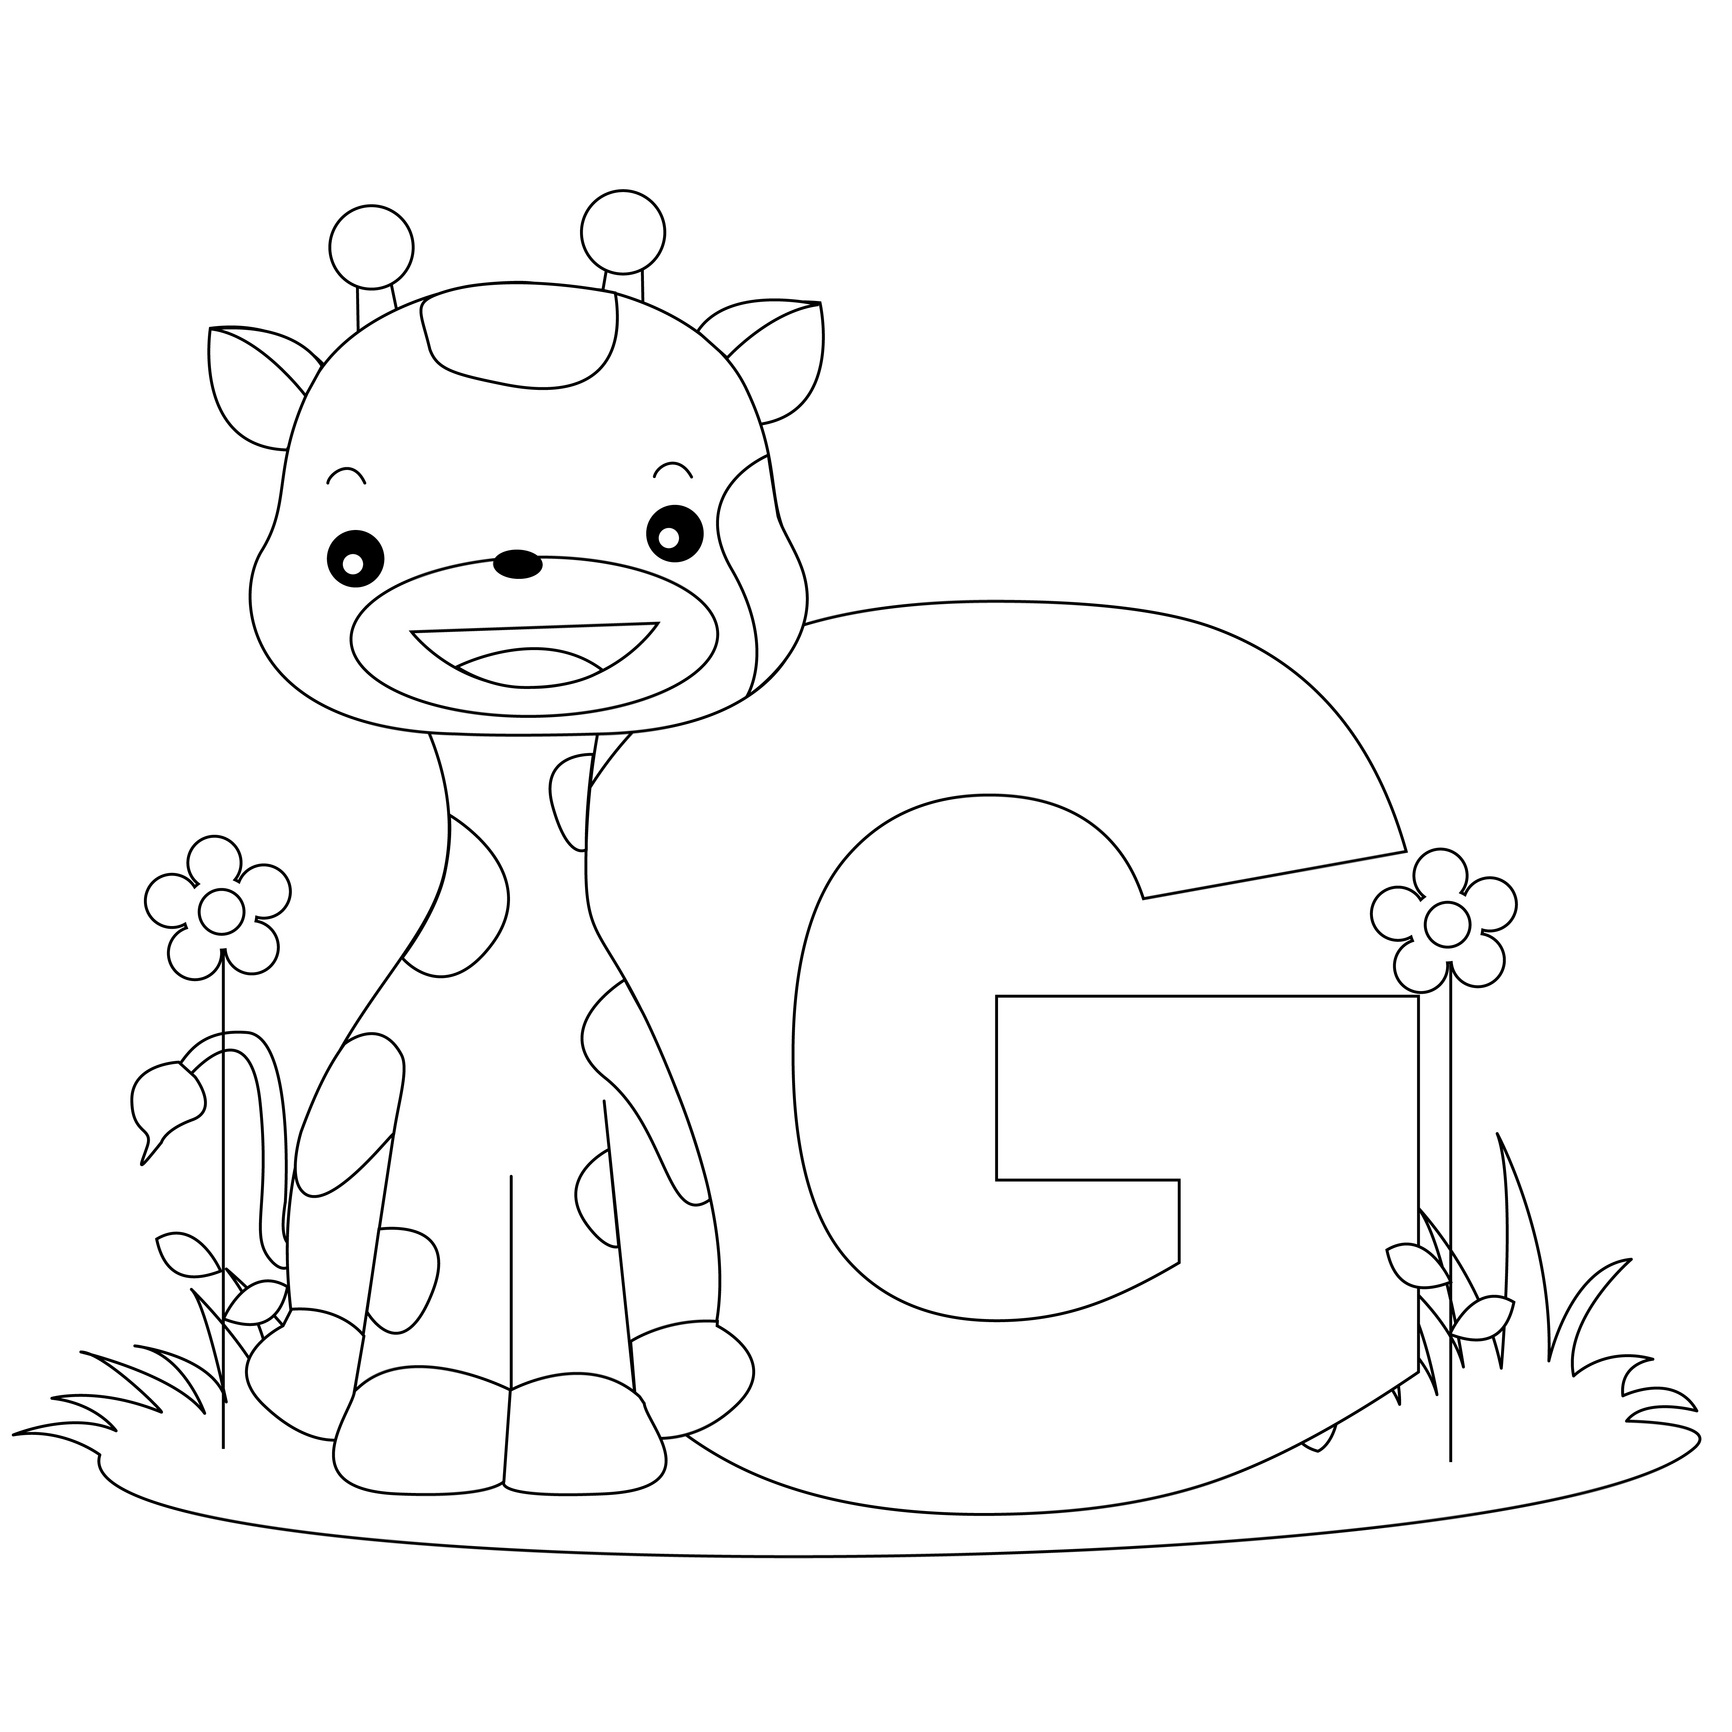 Animal Alphabet Coloring Pages Free at GetColorings.com | Free